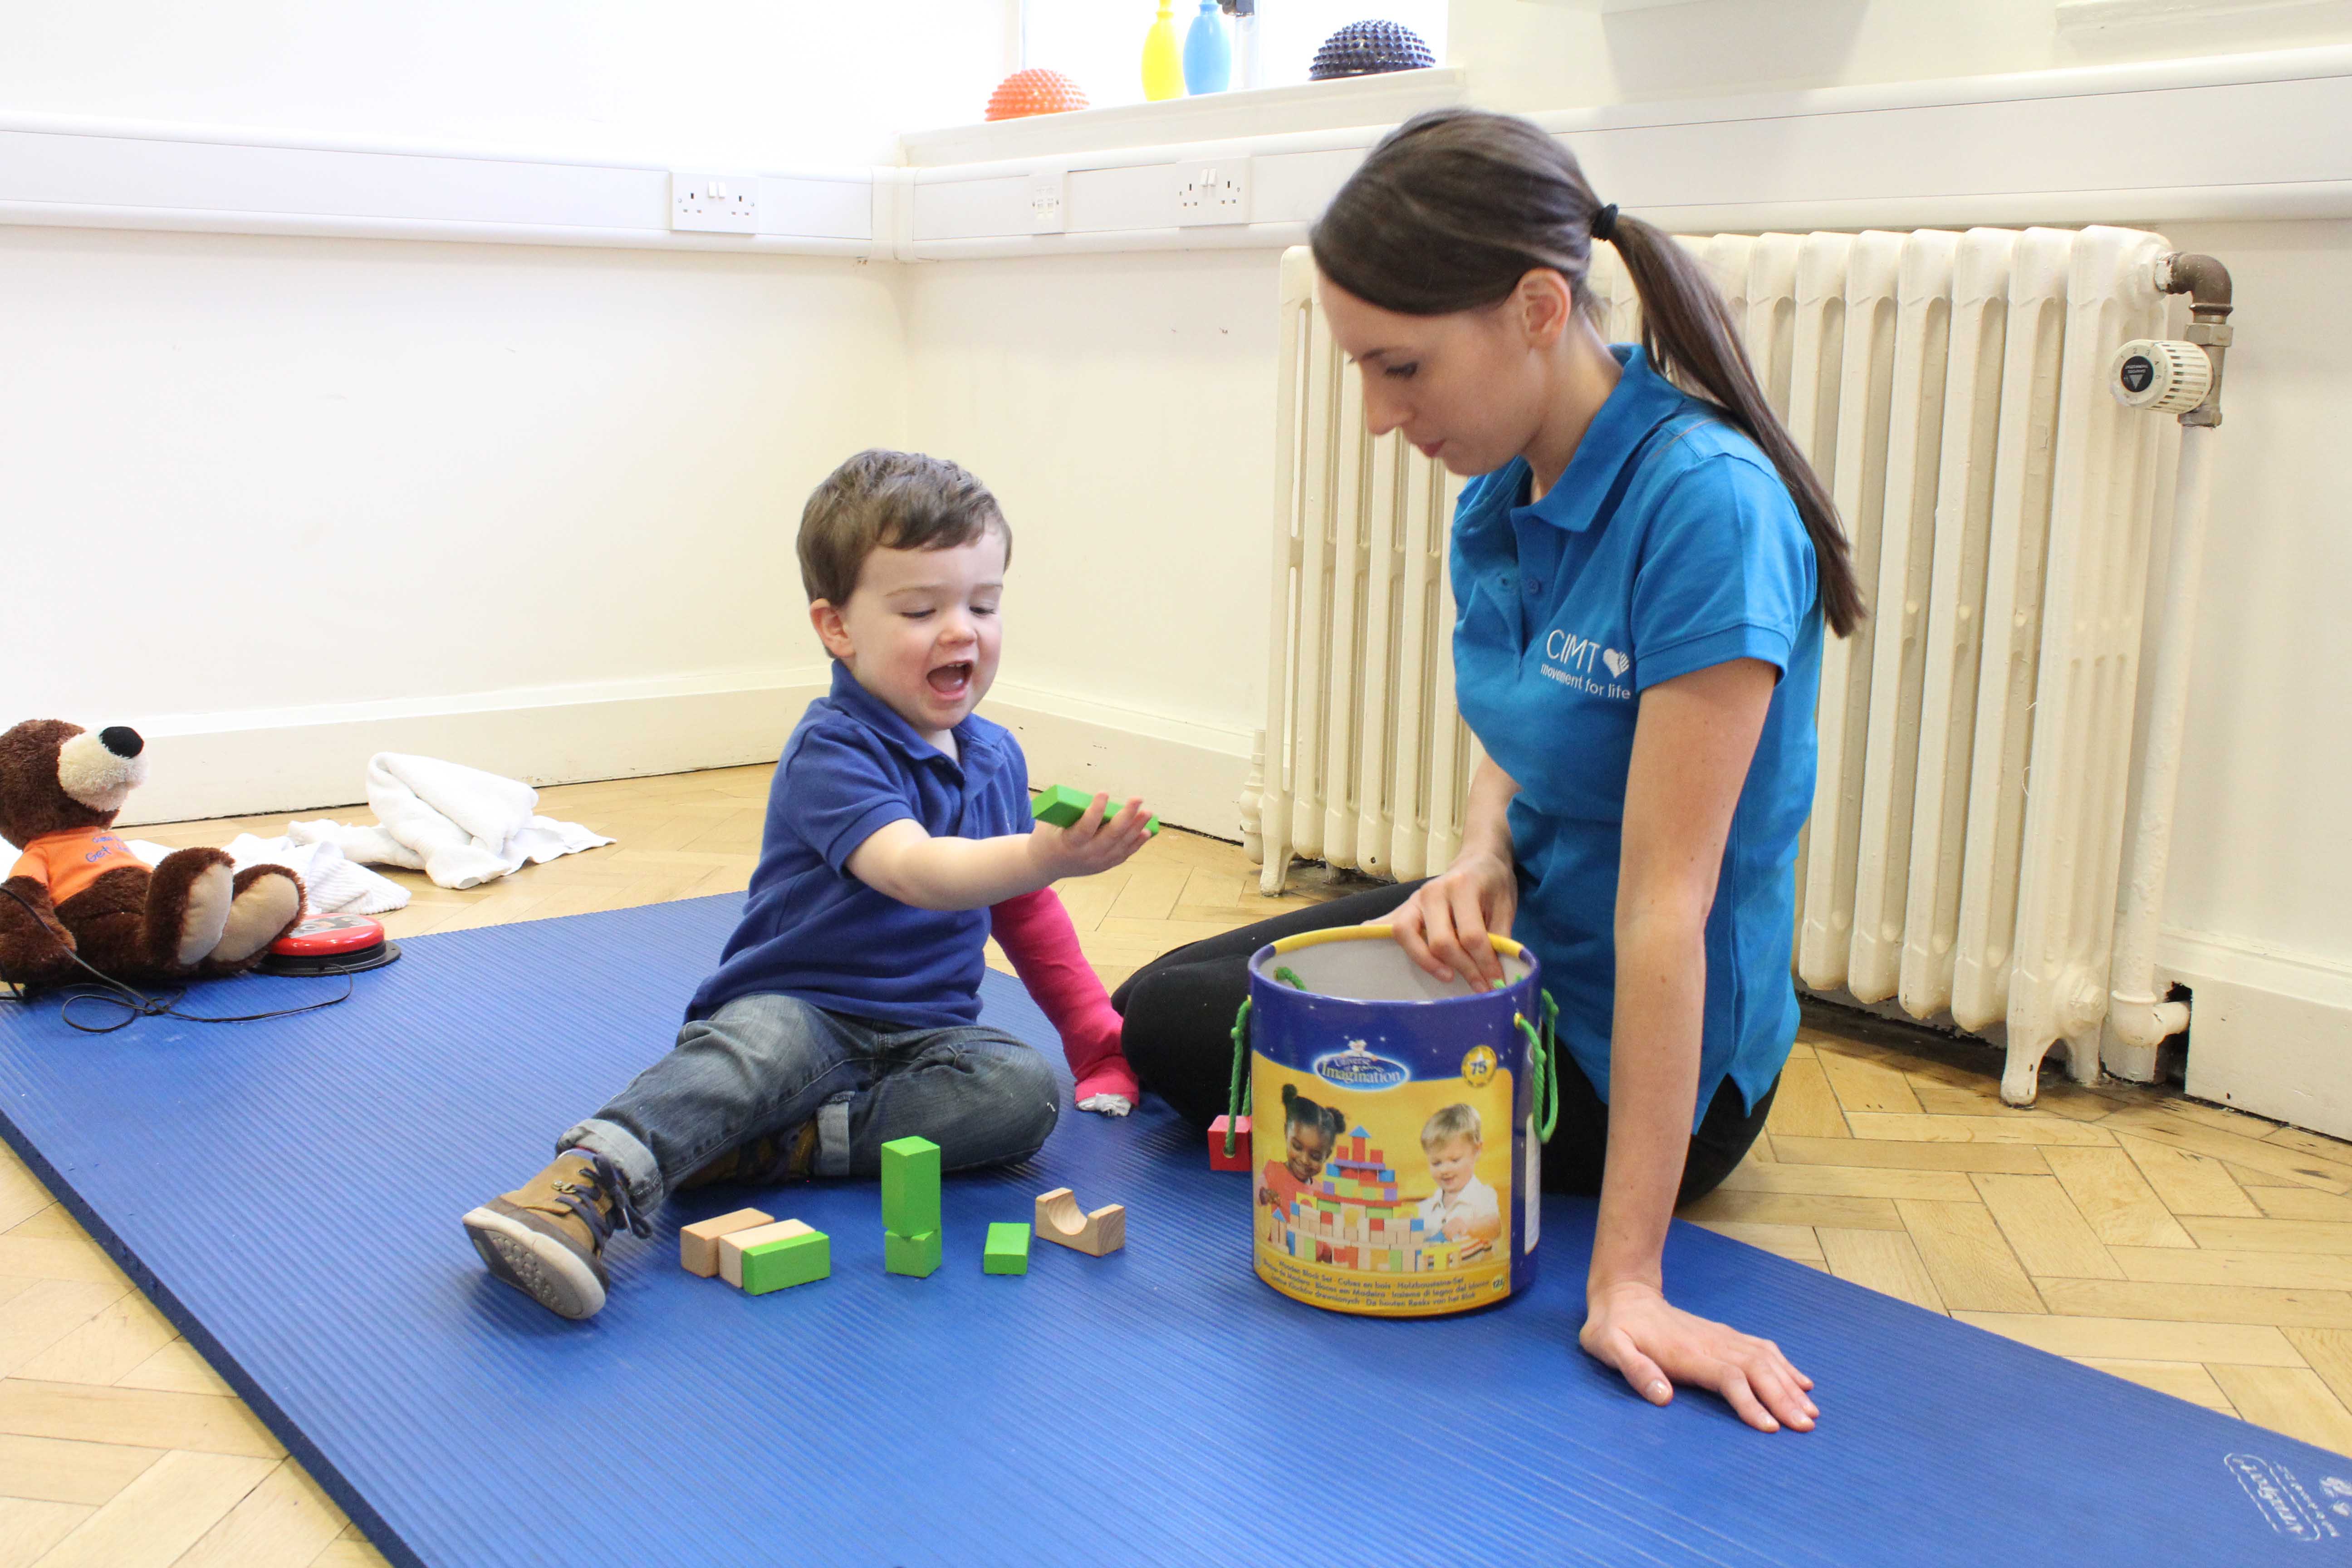 Equalising the development of fine motor skills by constraining the dominant limb and engaging with structured play